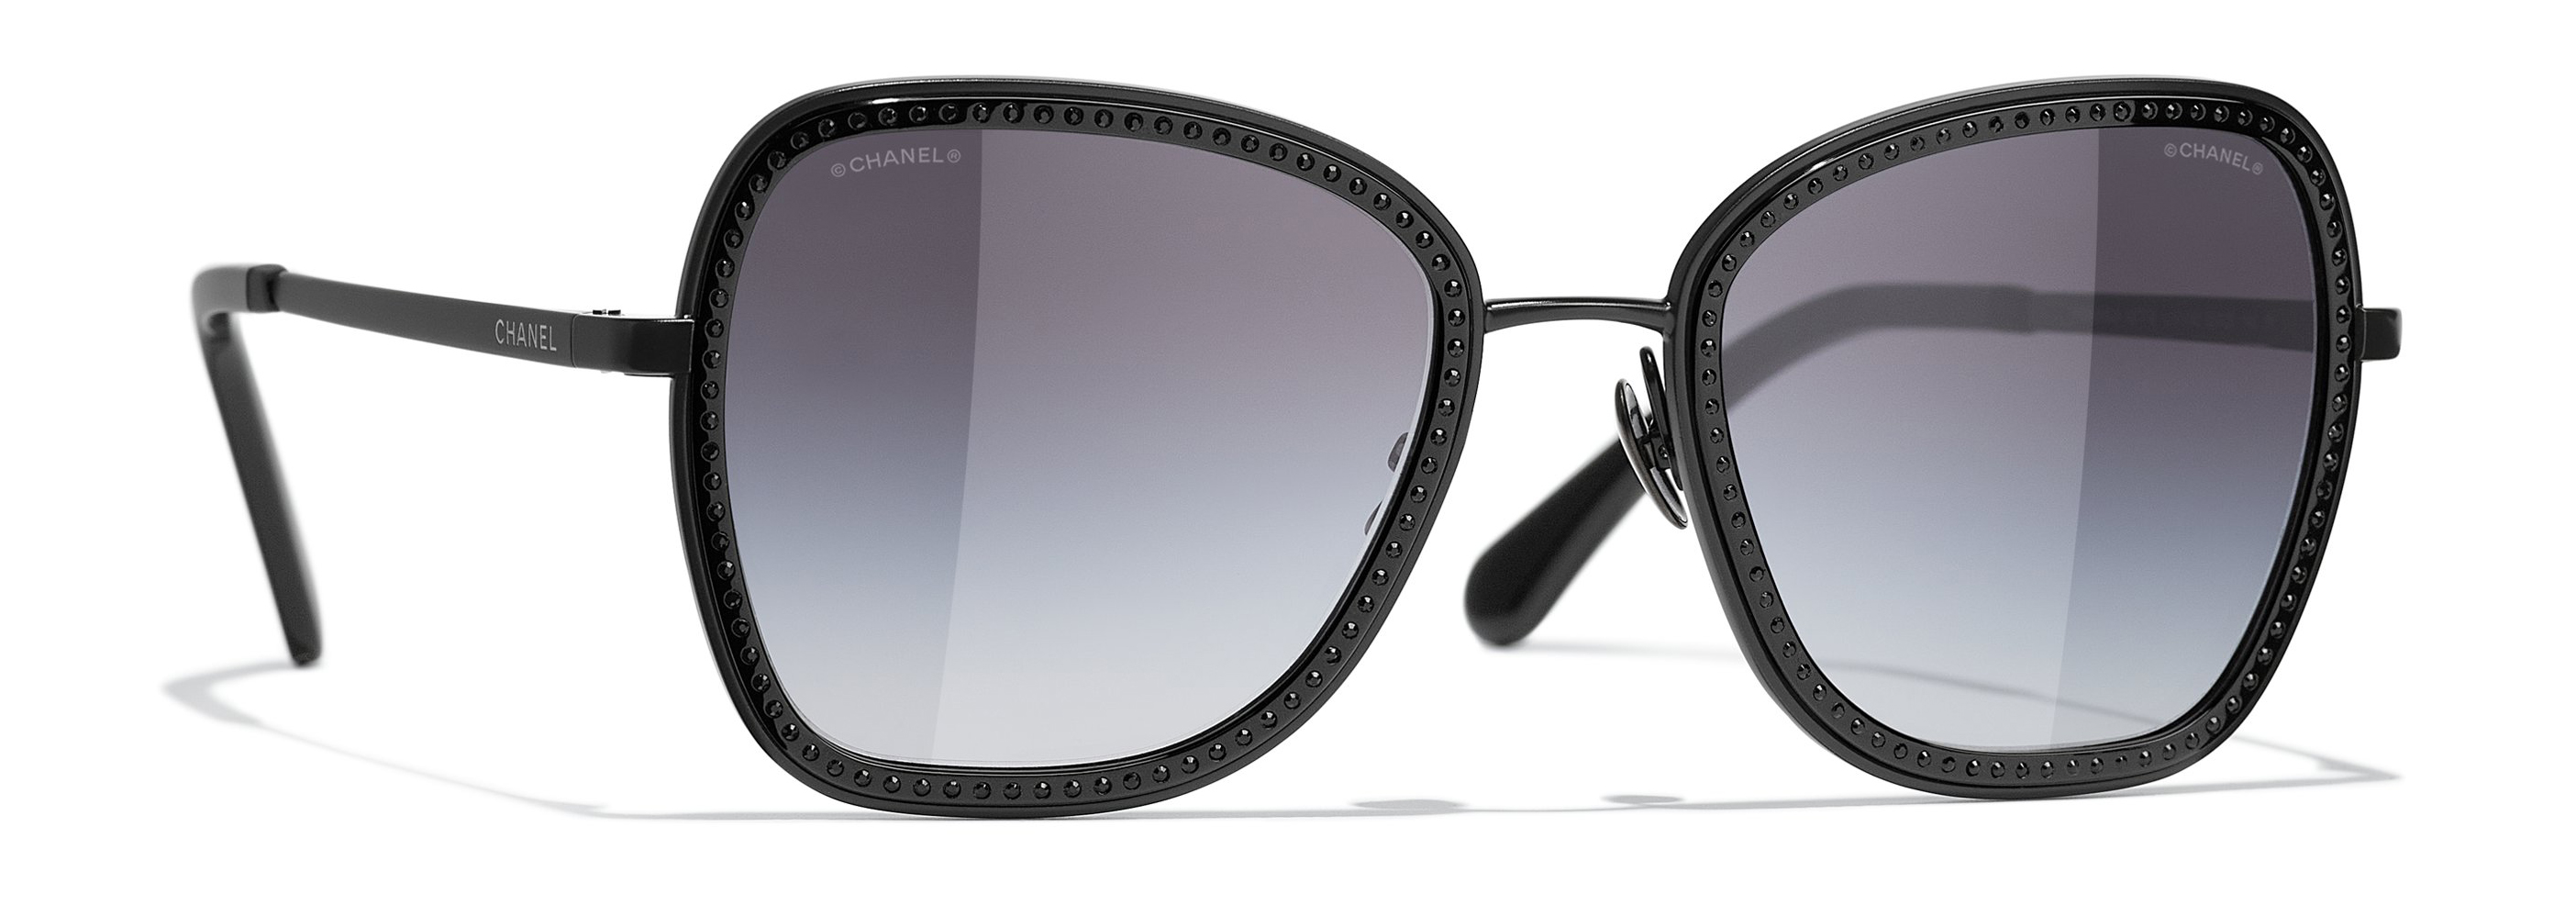 Sunglasses of type Full Frame Glasses, CHANEL Home delivery at the